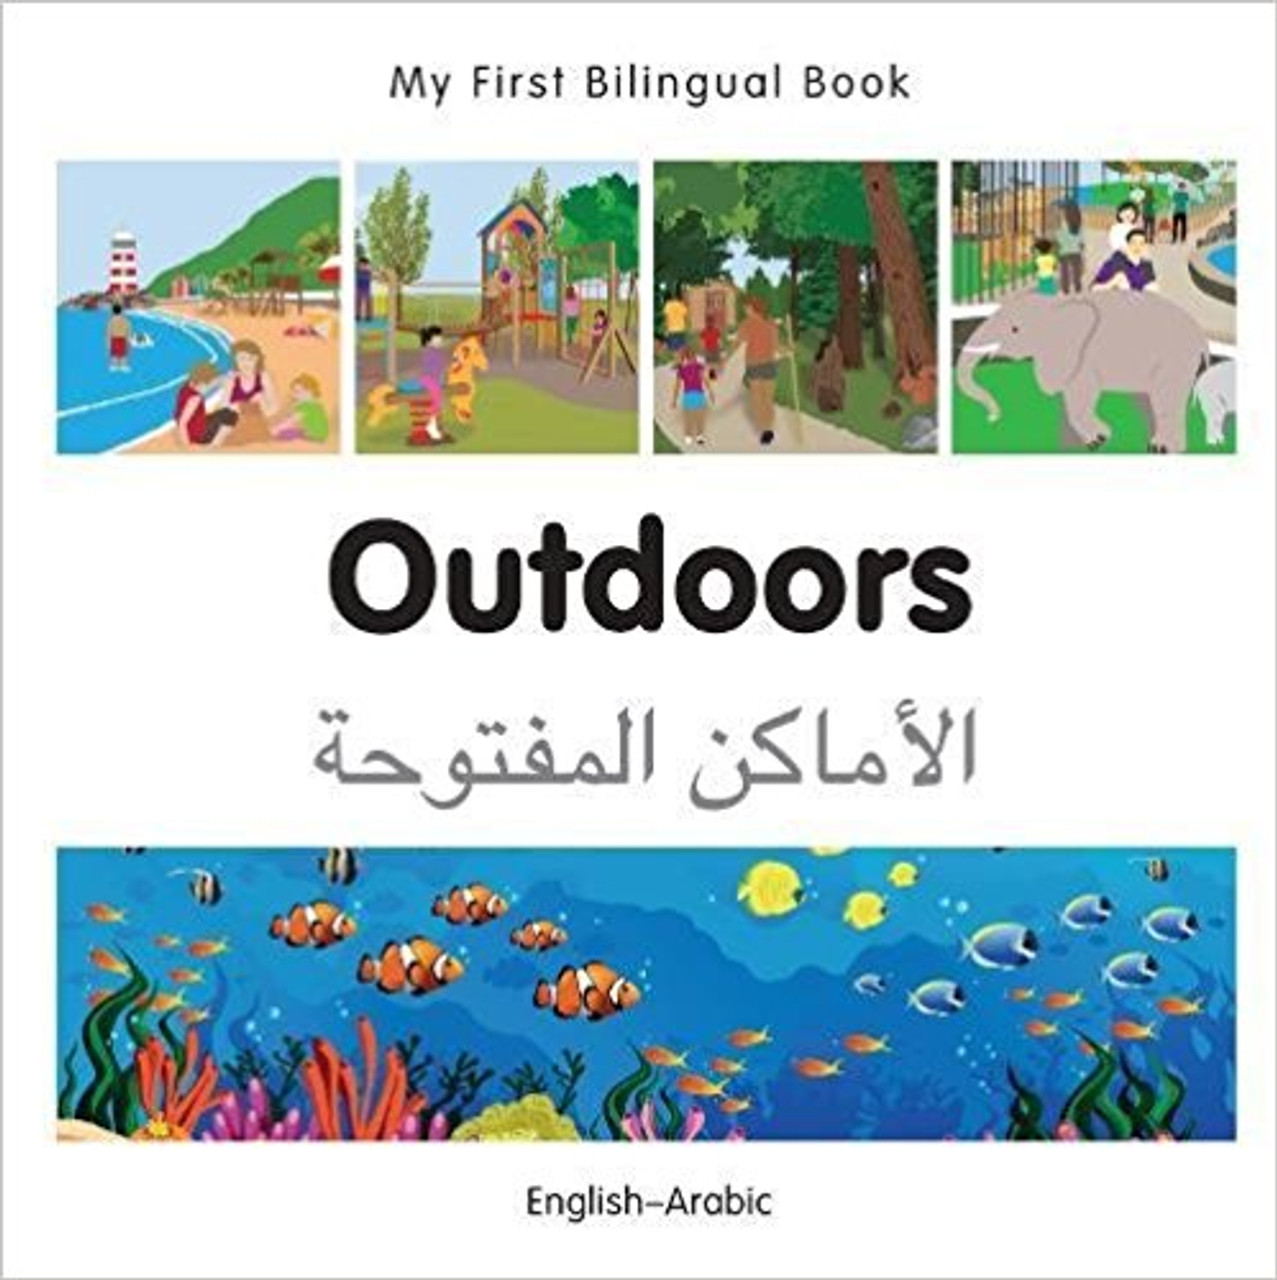 Outdoors (Arabic) by Millet Publishing